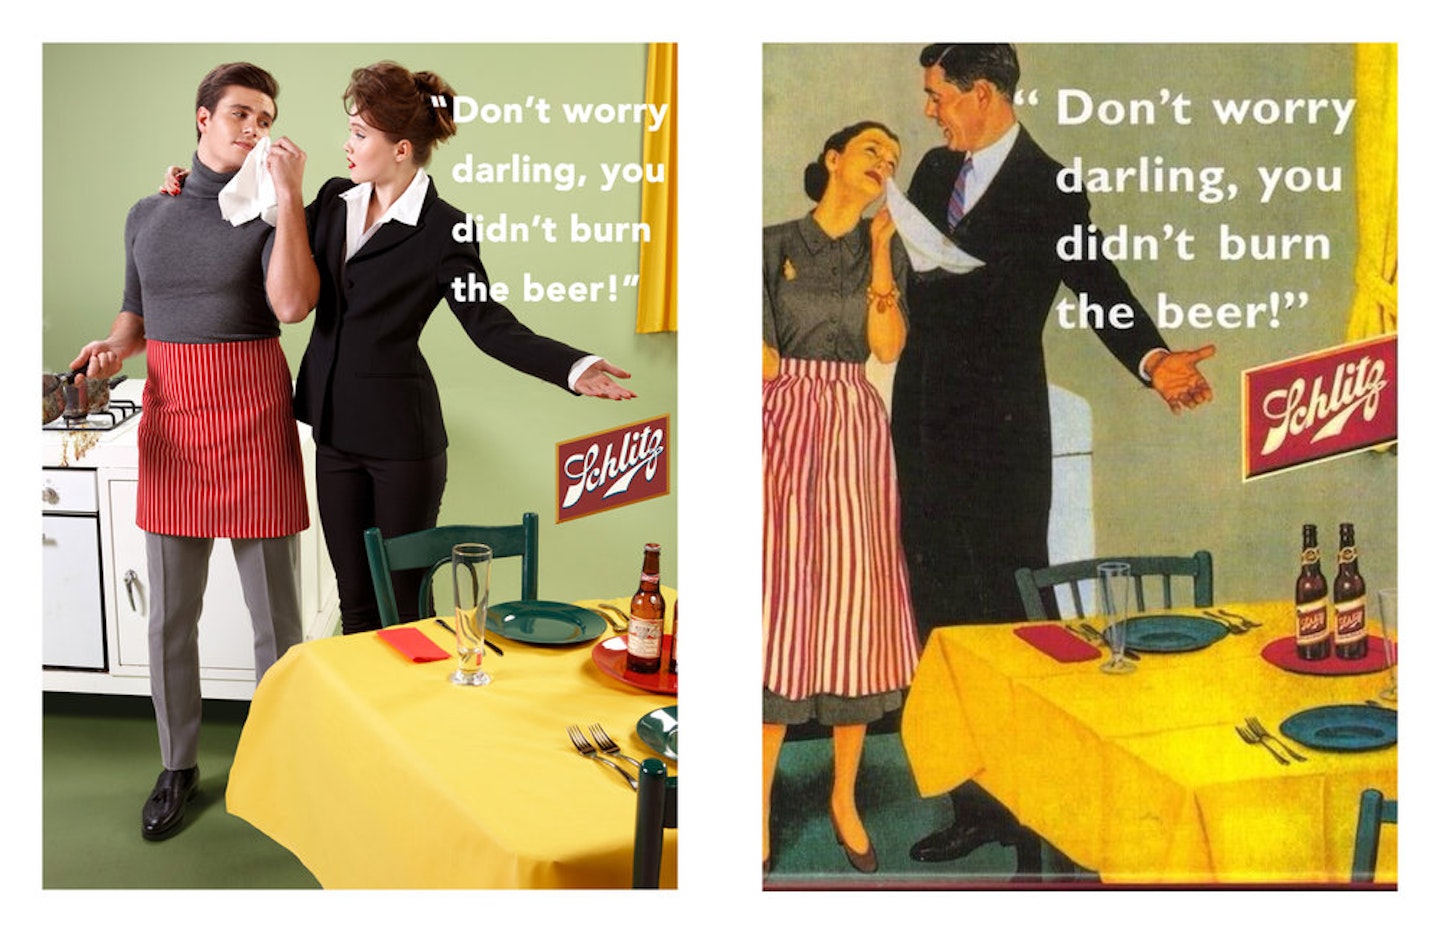 Here S What Sexist Ads From The 60s Would Look Like If The Gender Roles Were Reversed